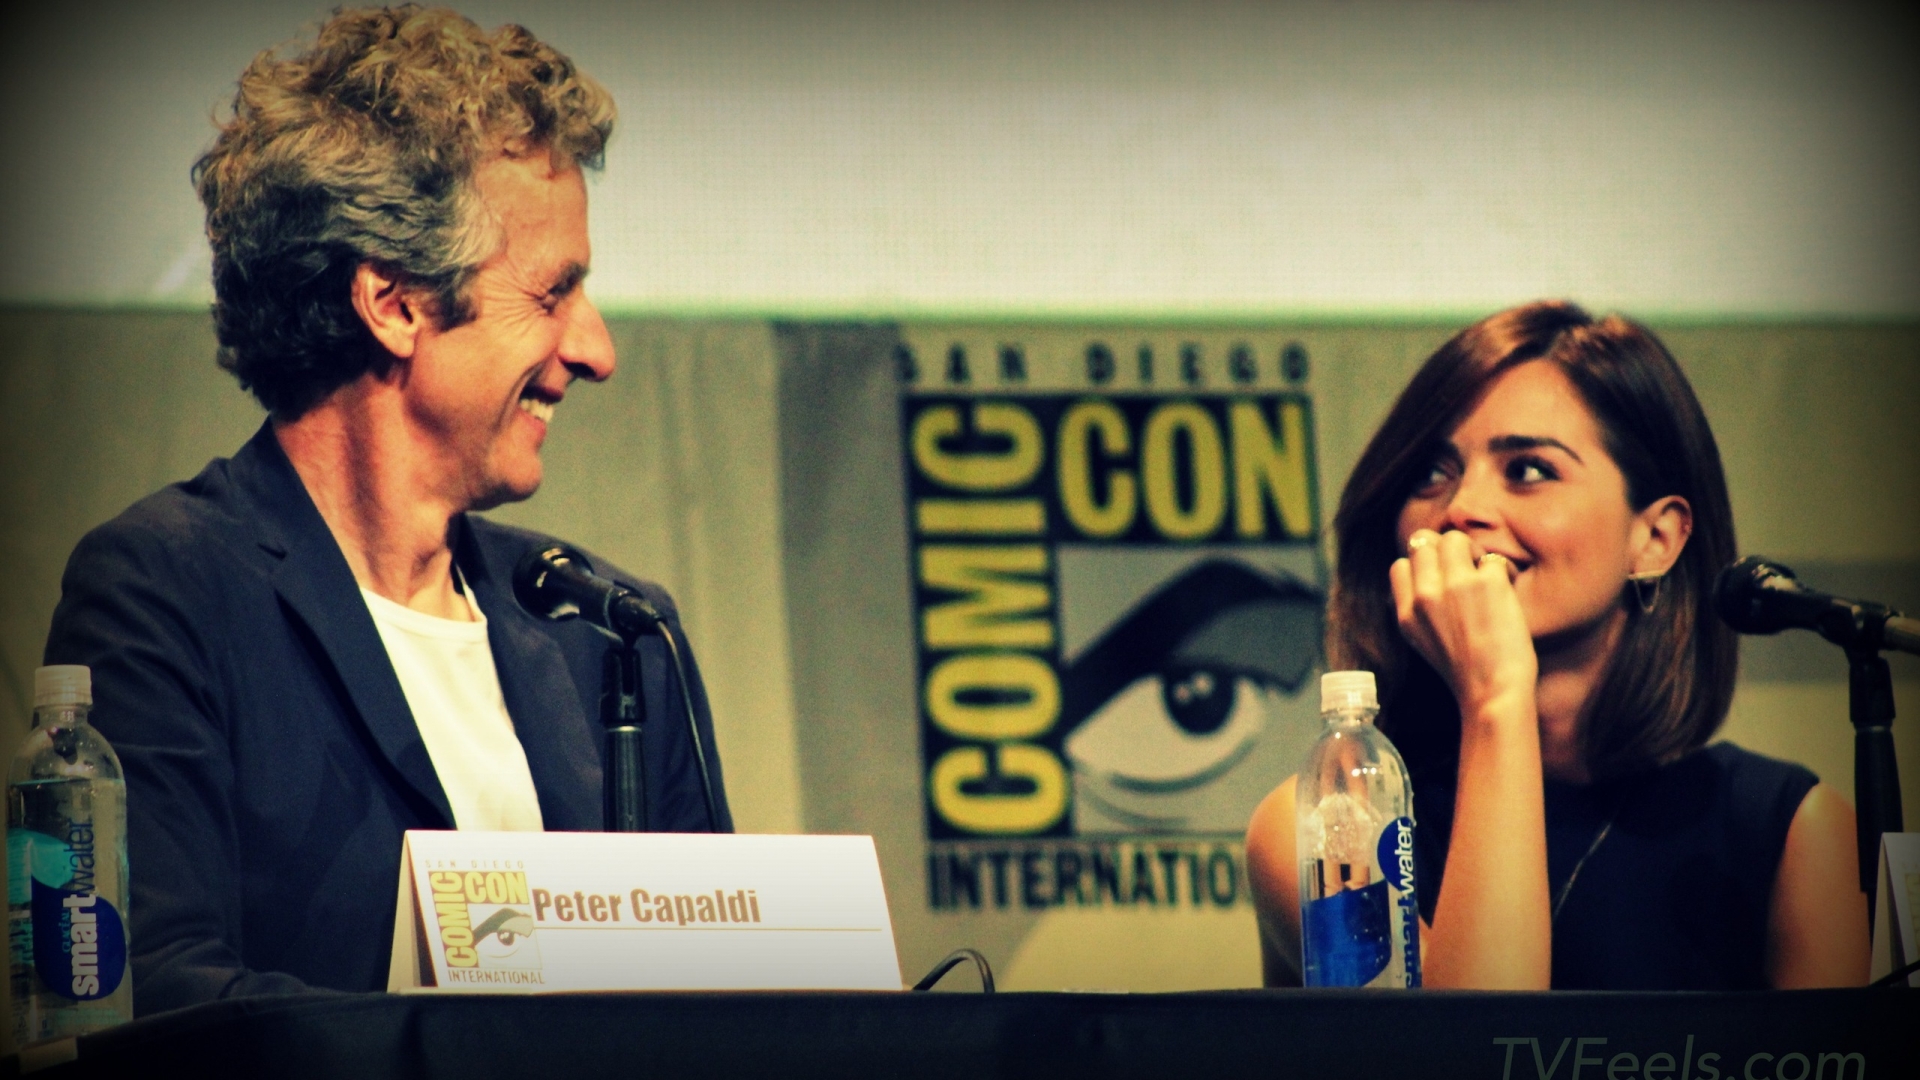 Doctor Who Peter Capaldi and Jenna Coleman at Comic Con for 1920 x 1080 HDTV 1080p resolution